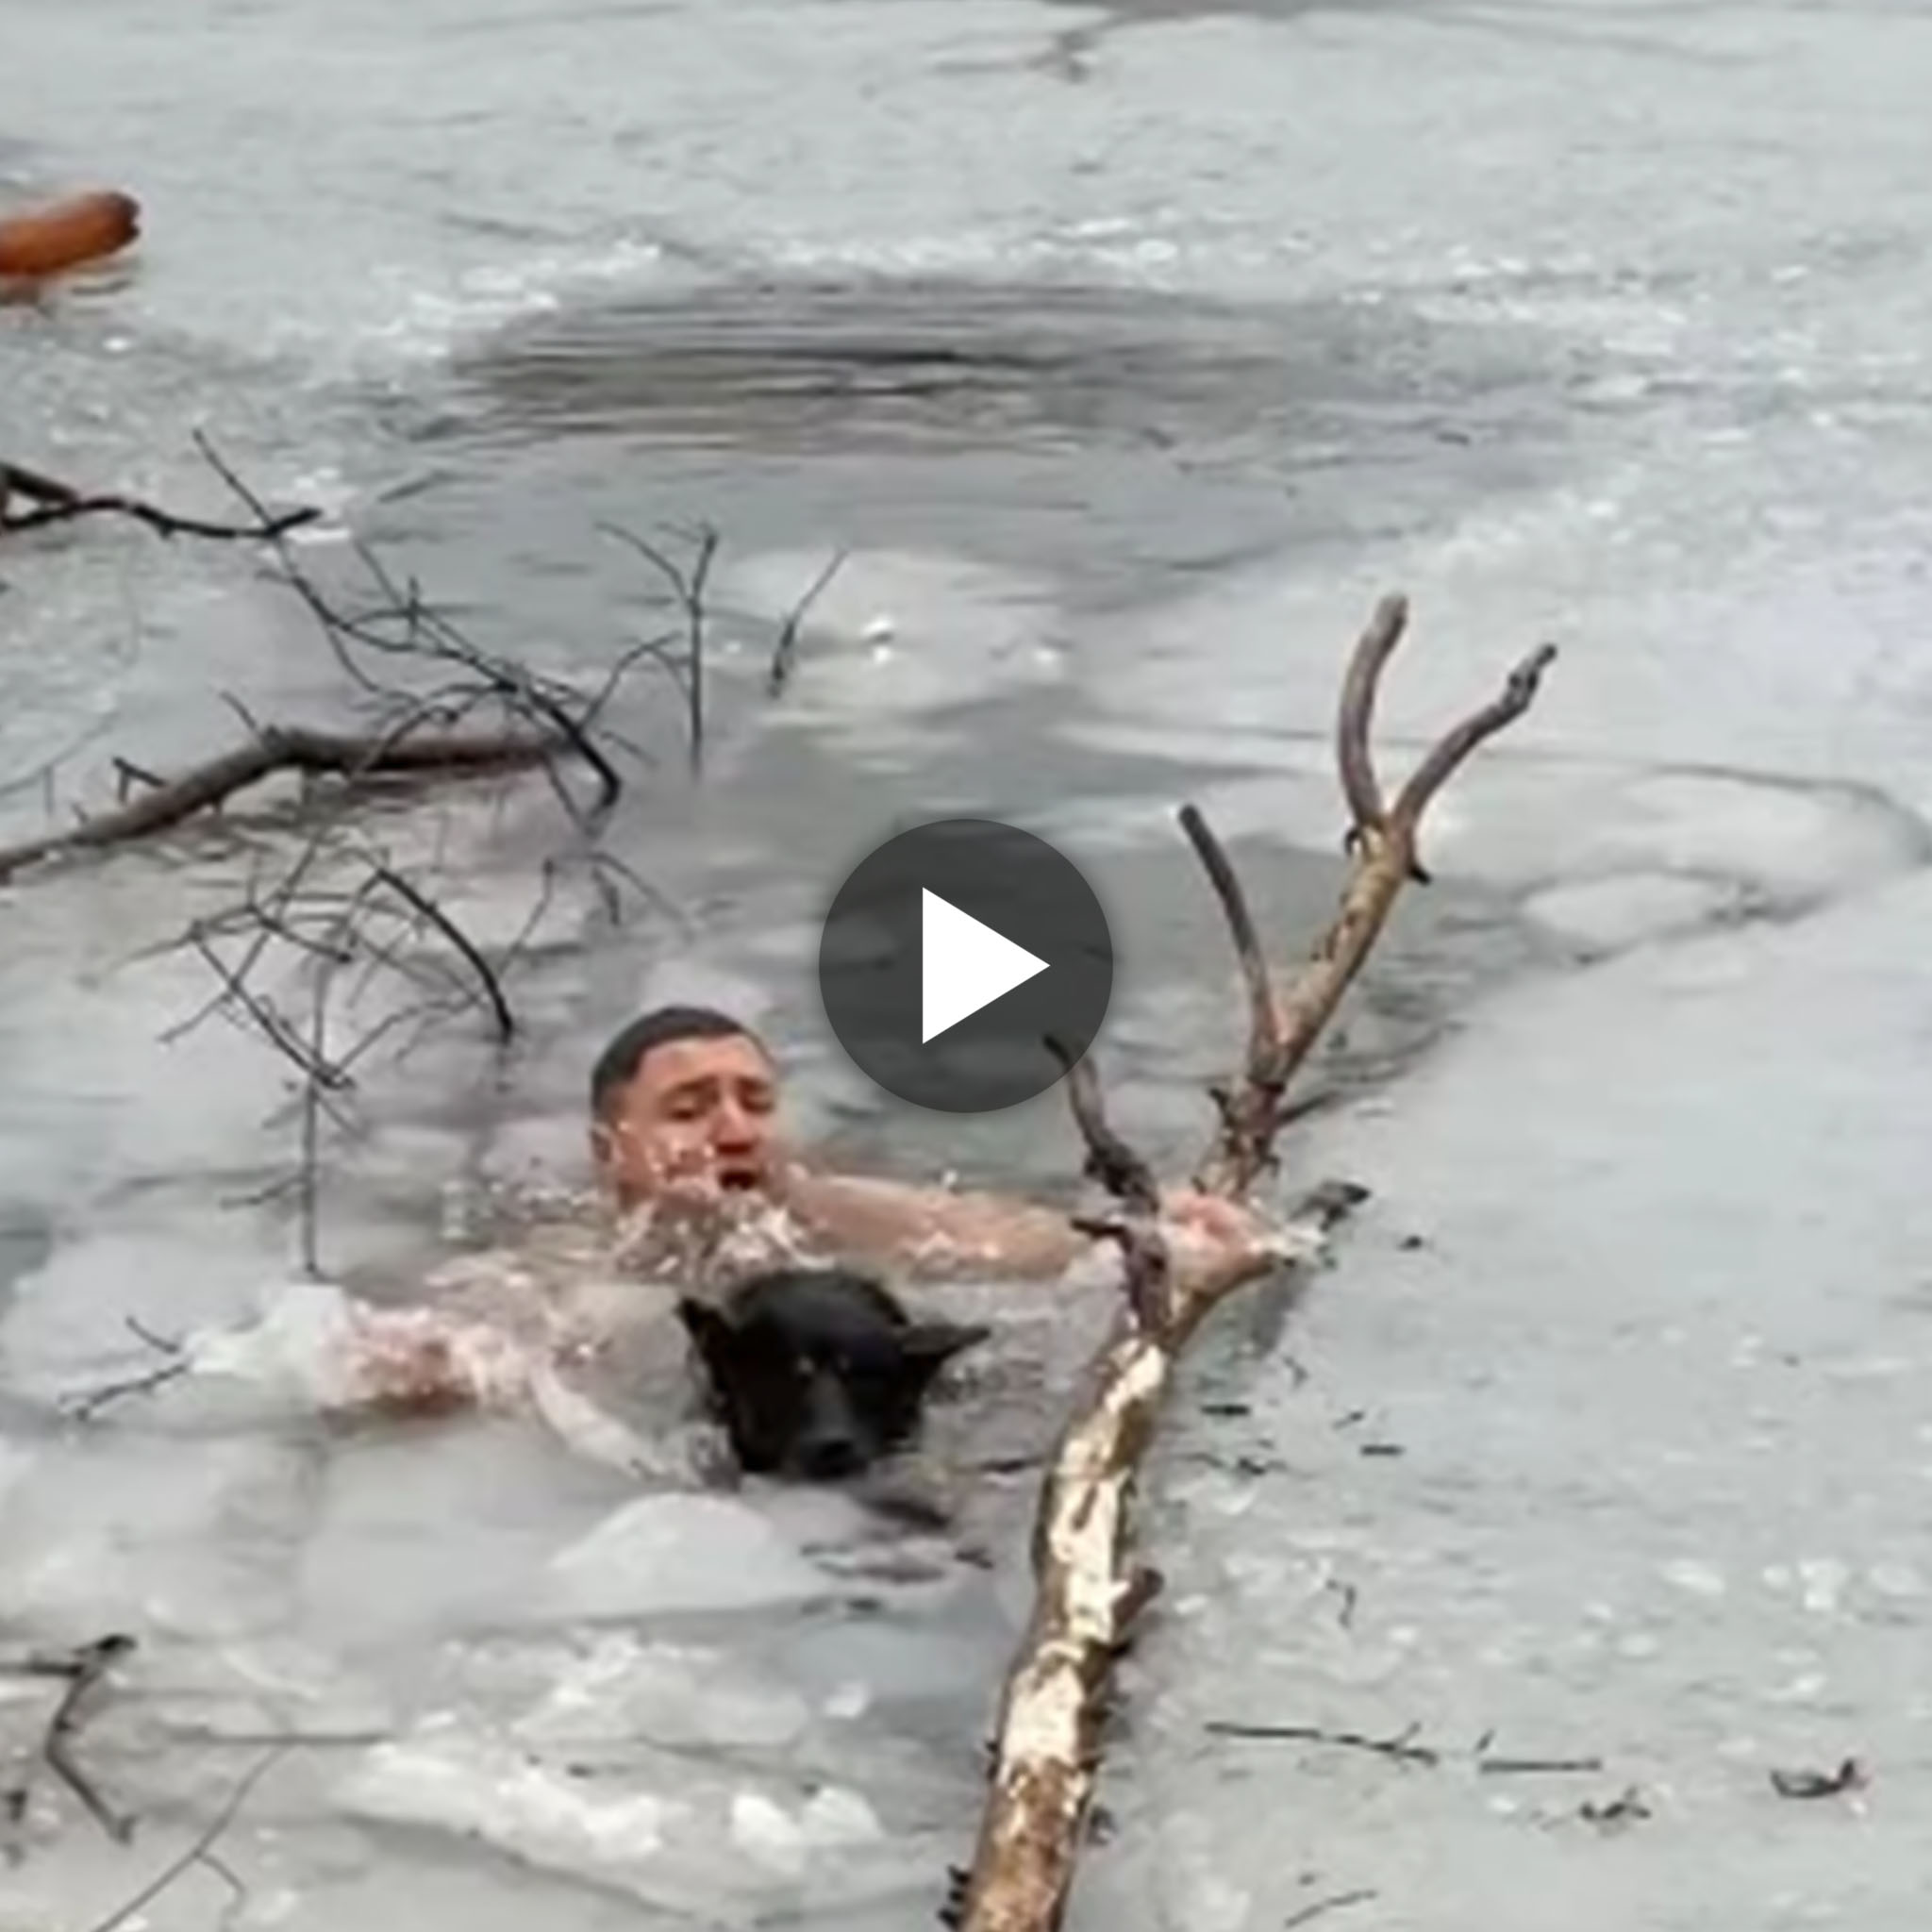 Brave man dives into icy lake to save a trapped dog, videos make viewers hold their breath in suspense (VIDEO)